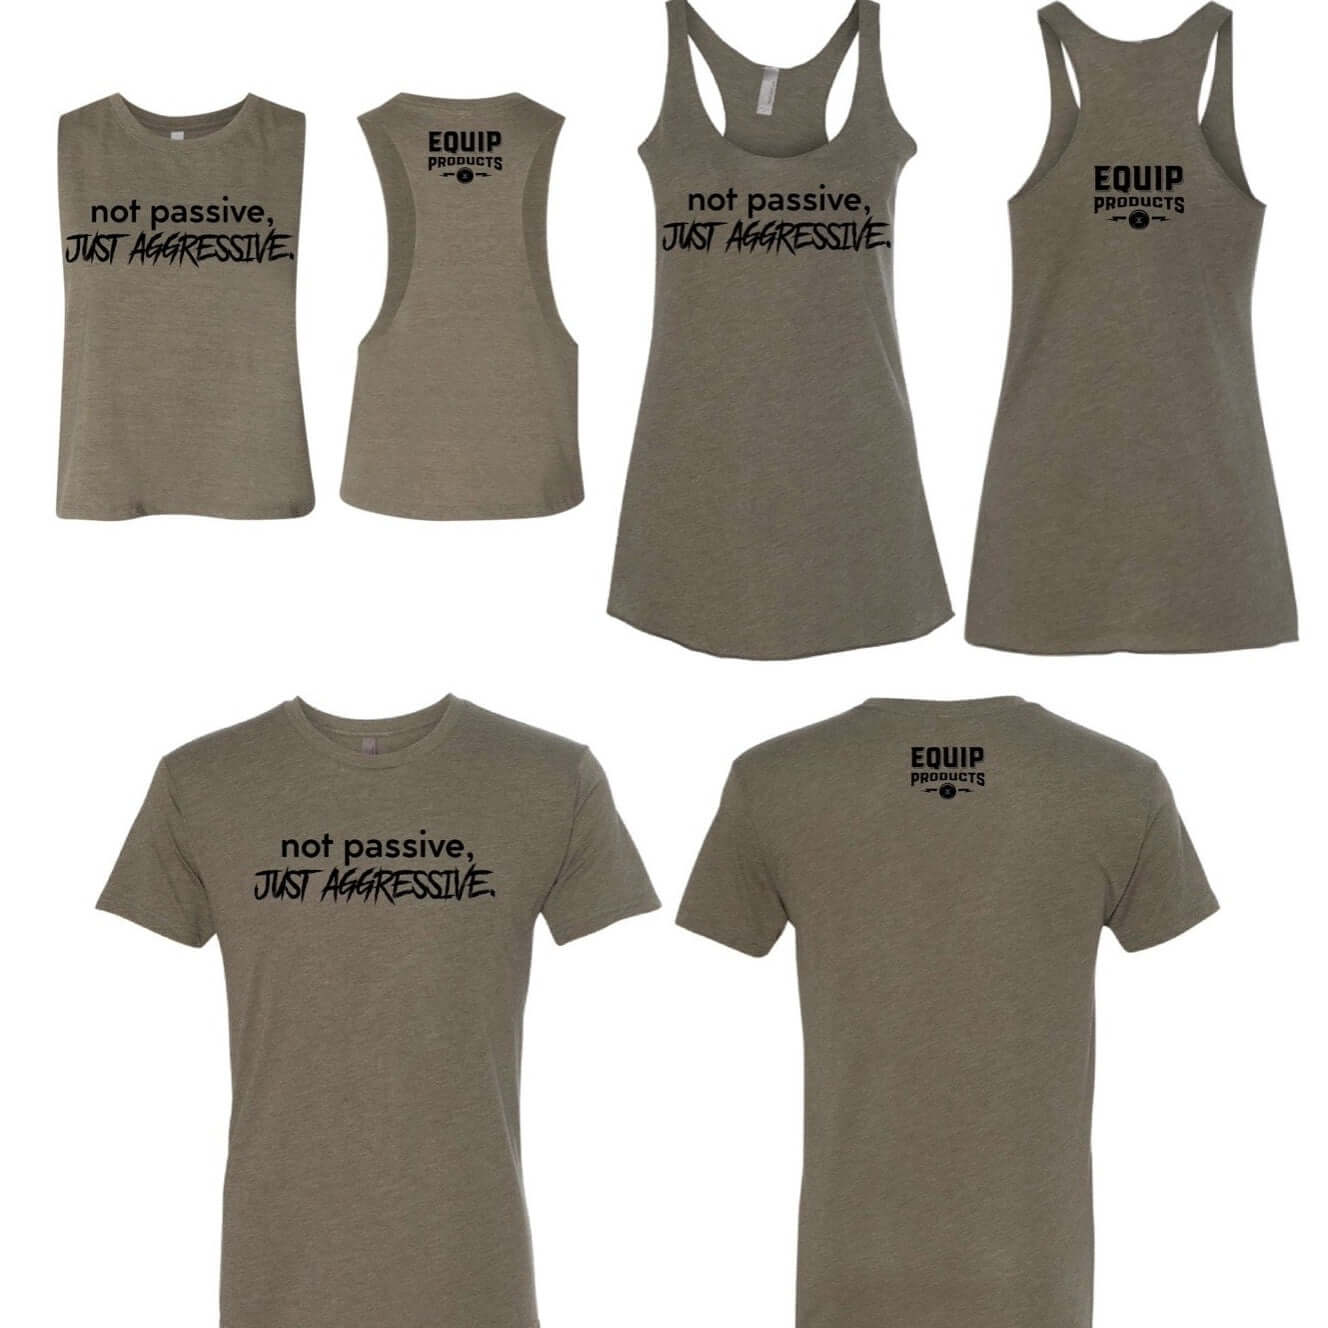 Olive colored t-shirt, tank & crop that states "Not Passive Just Aggressive" in black lettering with Equip name small on the back collar